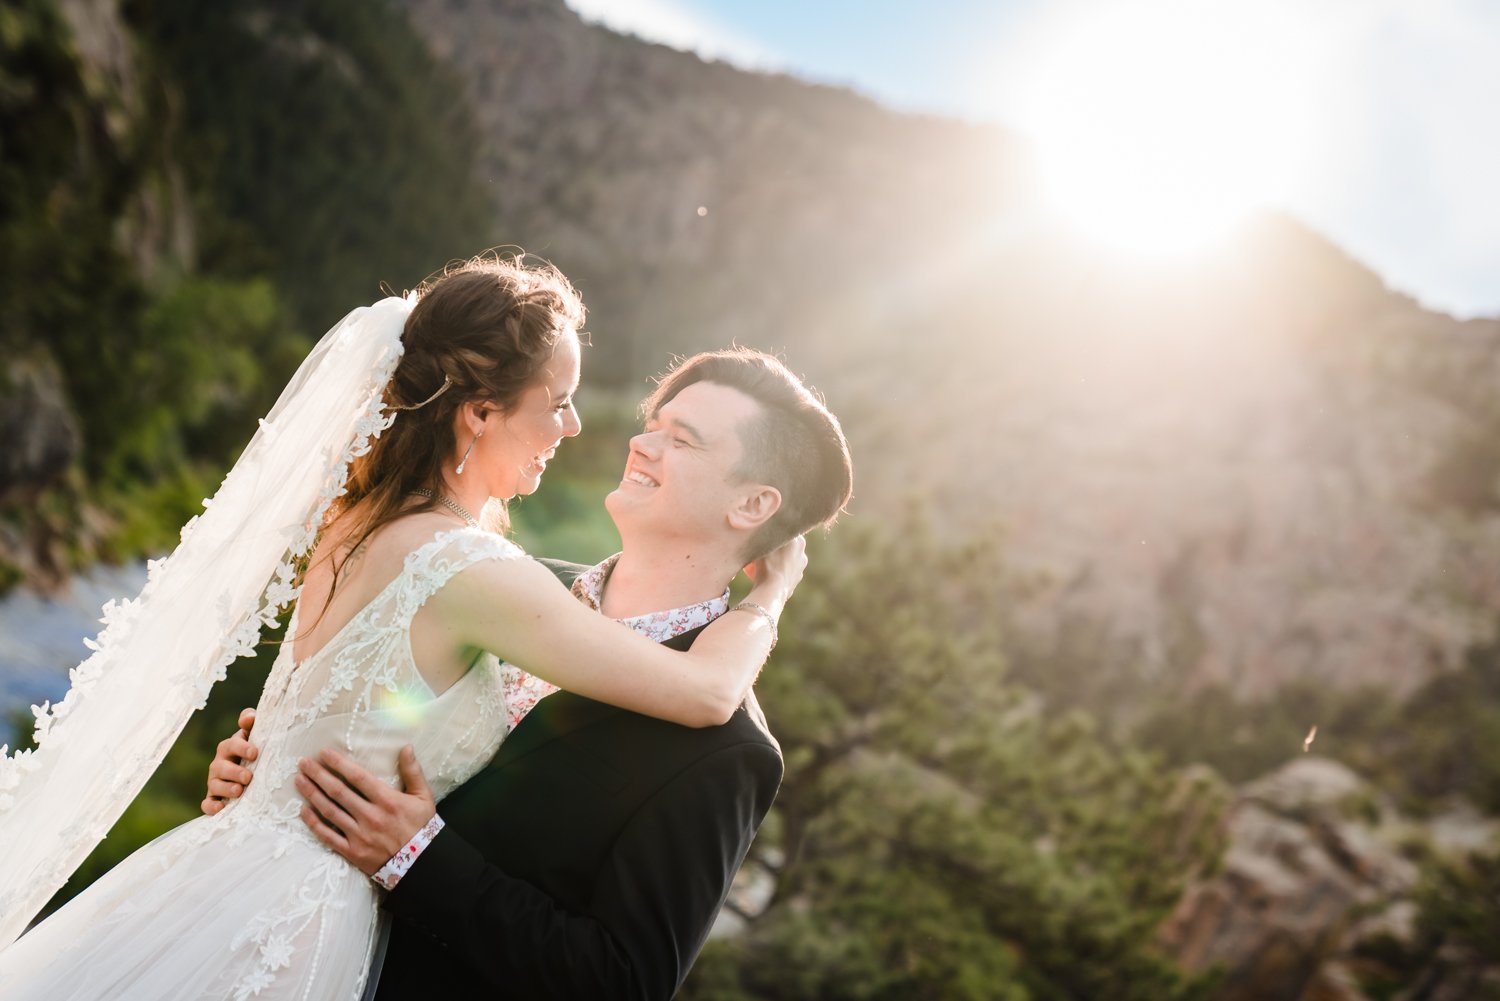  Cherokee Ranch and Castle wedding by Denver photographer, JMGant Photography 